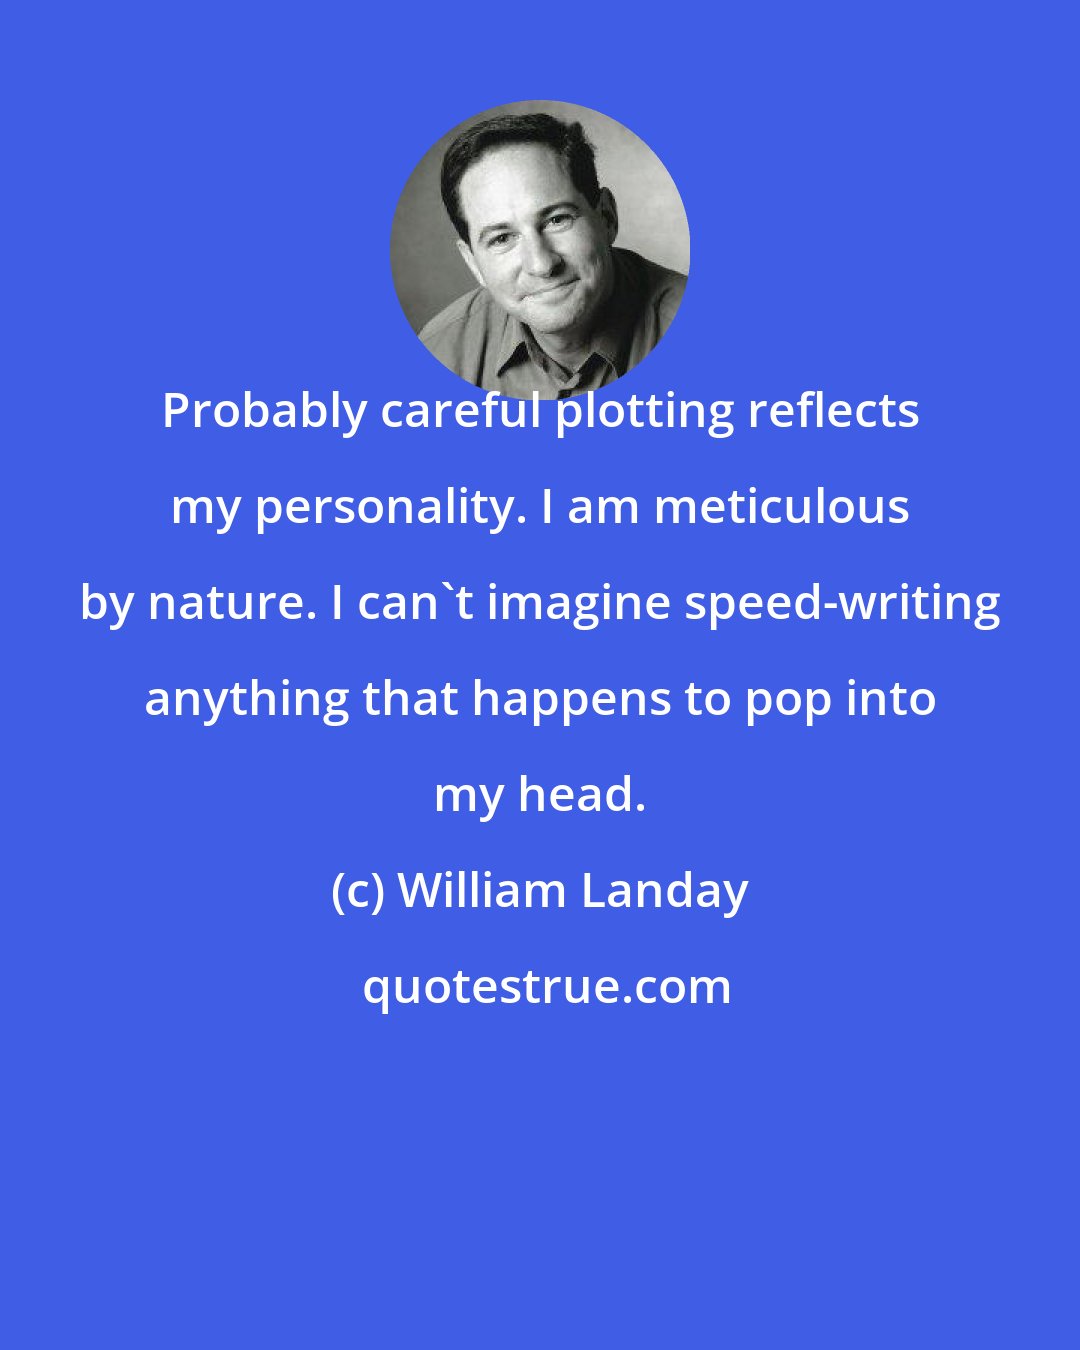 William Landay: Probably careful plotting reflects my personality. I am meticulous by nature. I can't imagine speed-writing anything that happens to pop into my head.